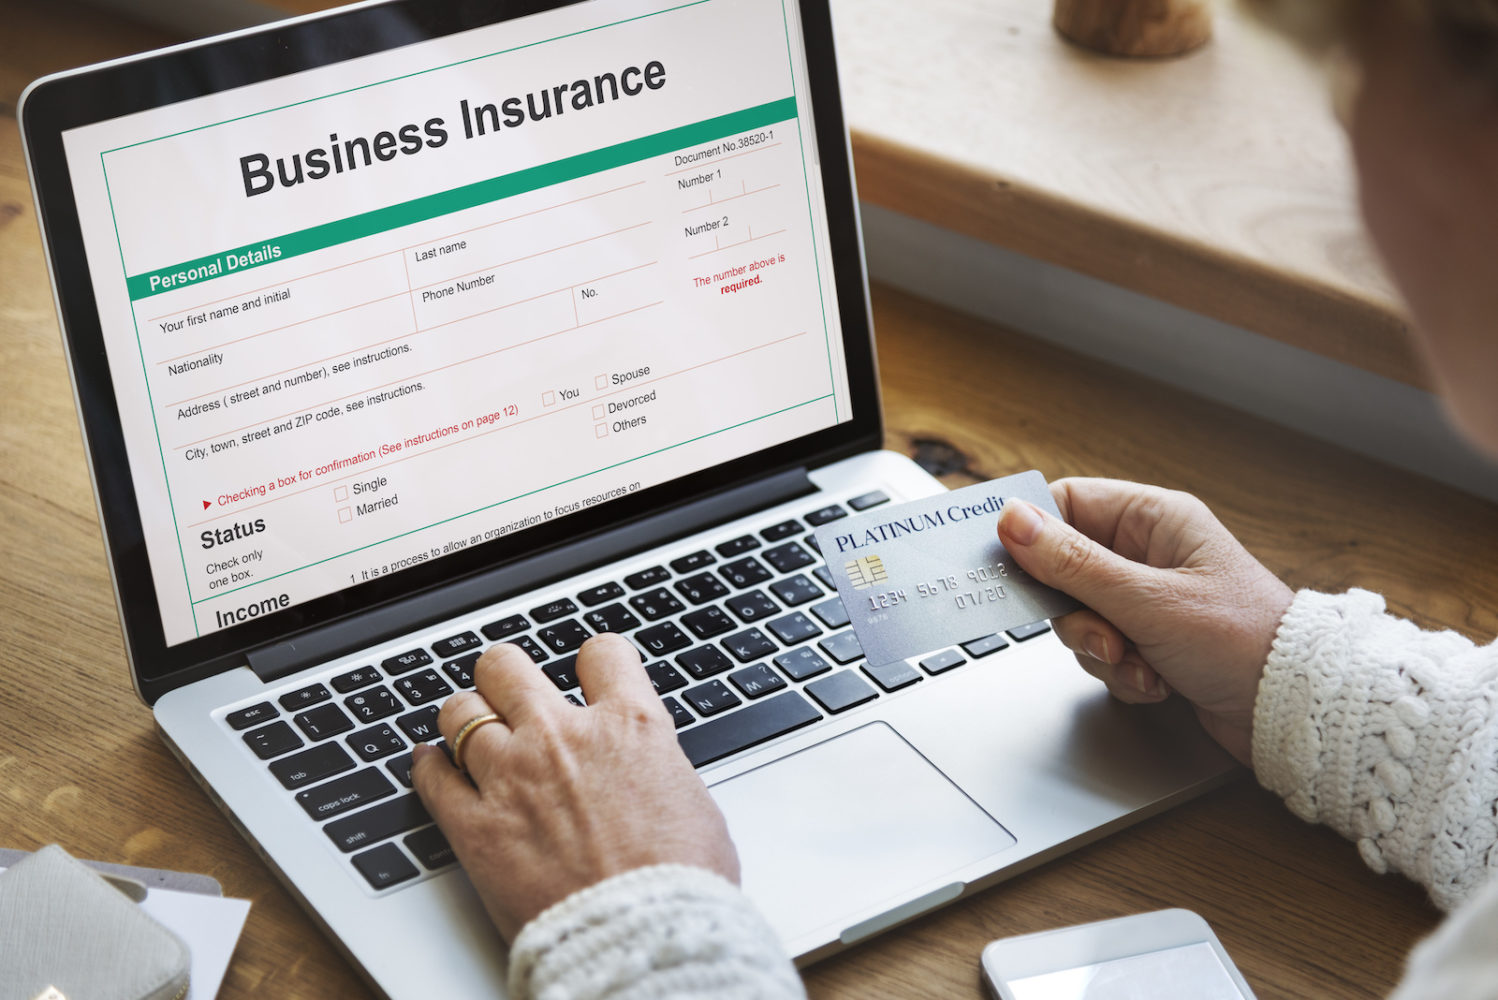 Online Commercial Insurance Products In Canada - ALIGNED Insurance Broker